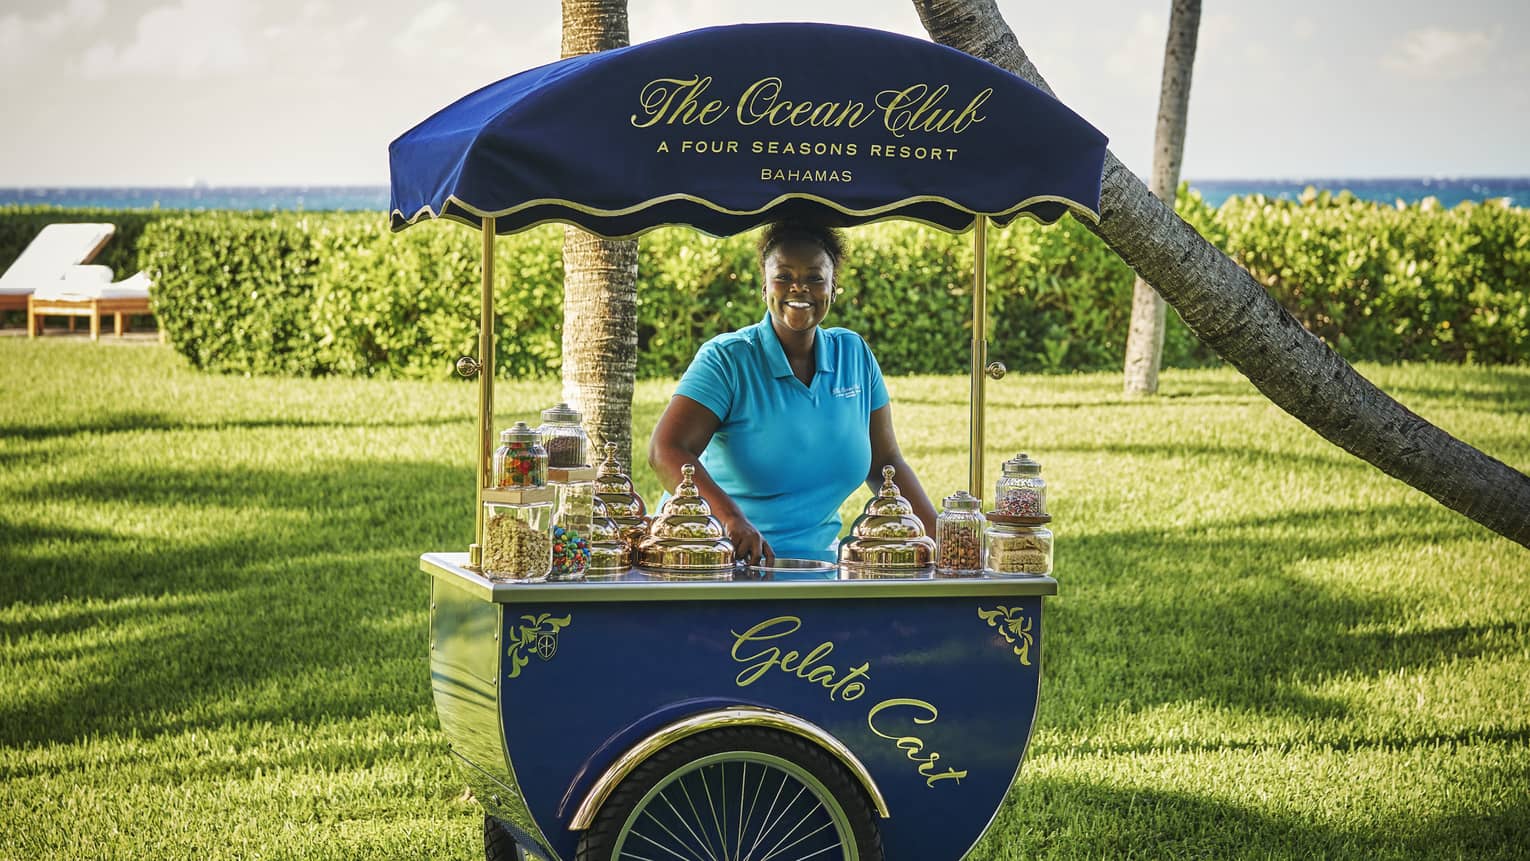 Navy blue Gelato Cart with woman in a blue shirt managing the cart.